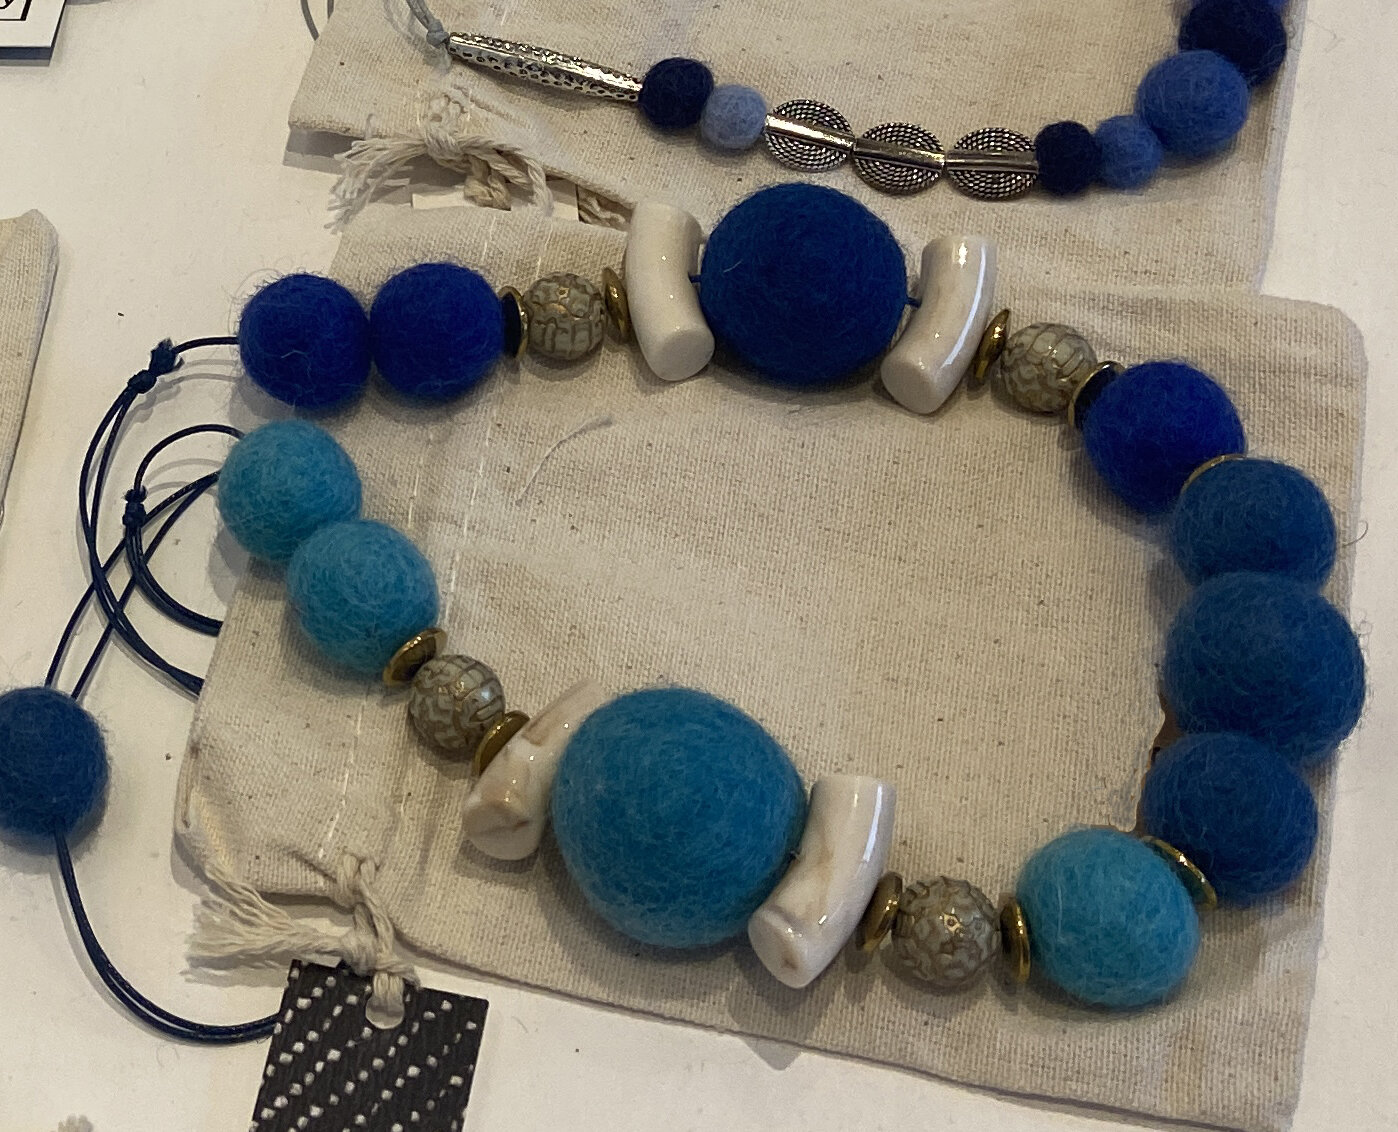 Wool, hematite and ceramic necklaces with drawstring purses